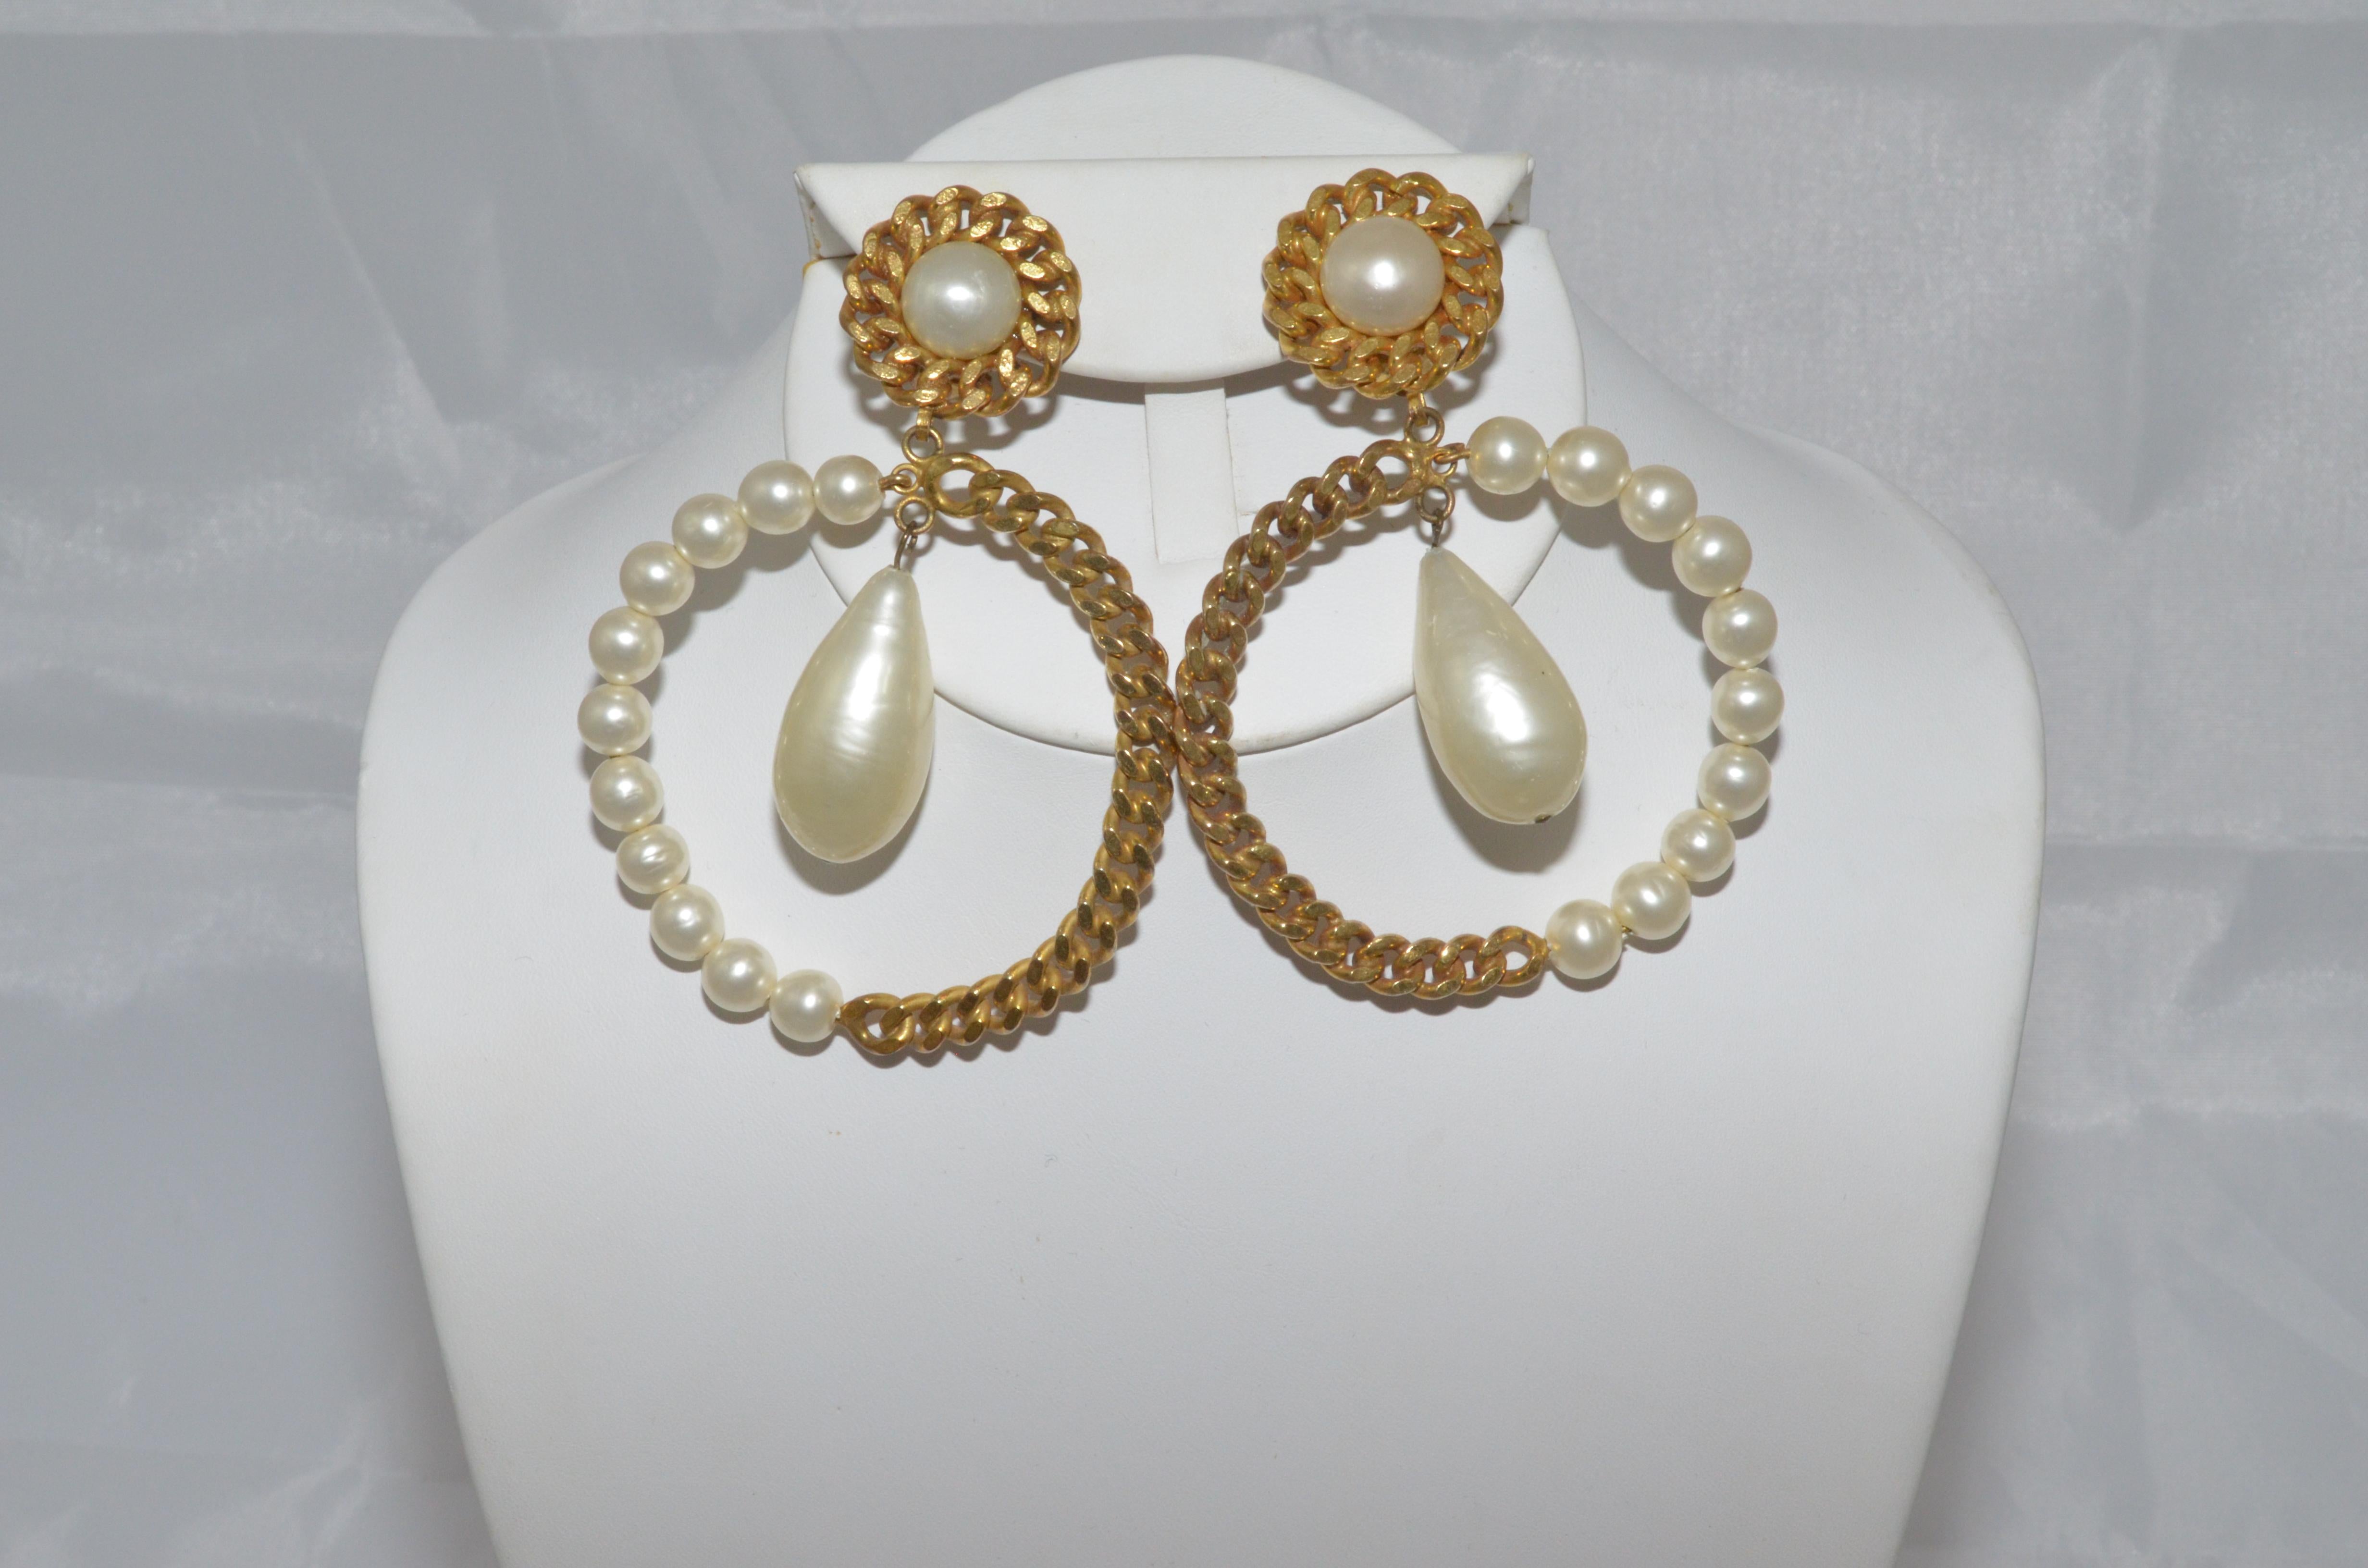 Vintage Chanel earrings featured in a pearl and gold-tone chain hoop with a large tear-shaped pearl that dangles from the top, and a clip-on fastening. Earrings are signed CHANEL, Made in France. Earrings are in excellent vintage condition with some